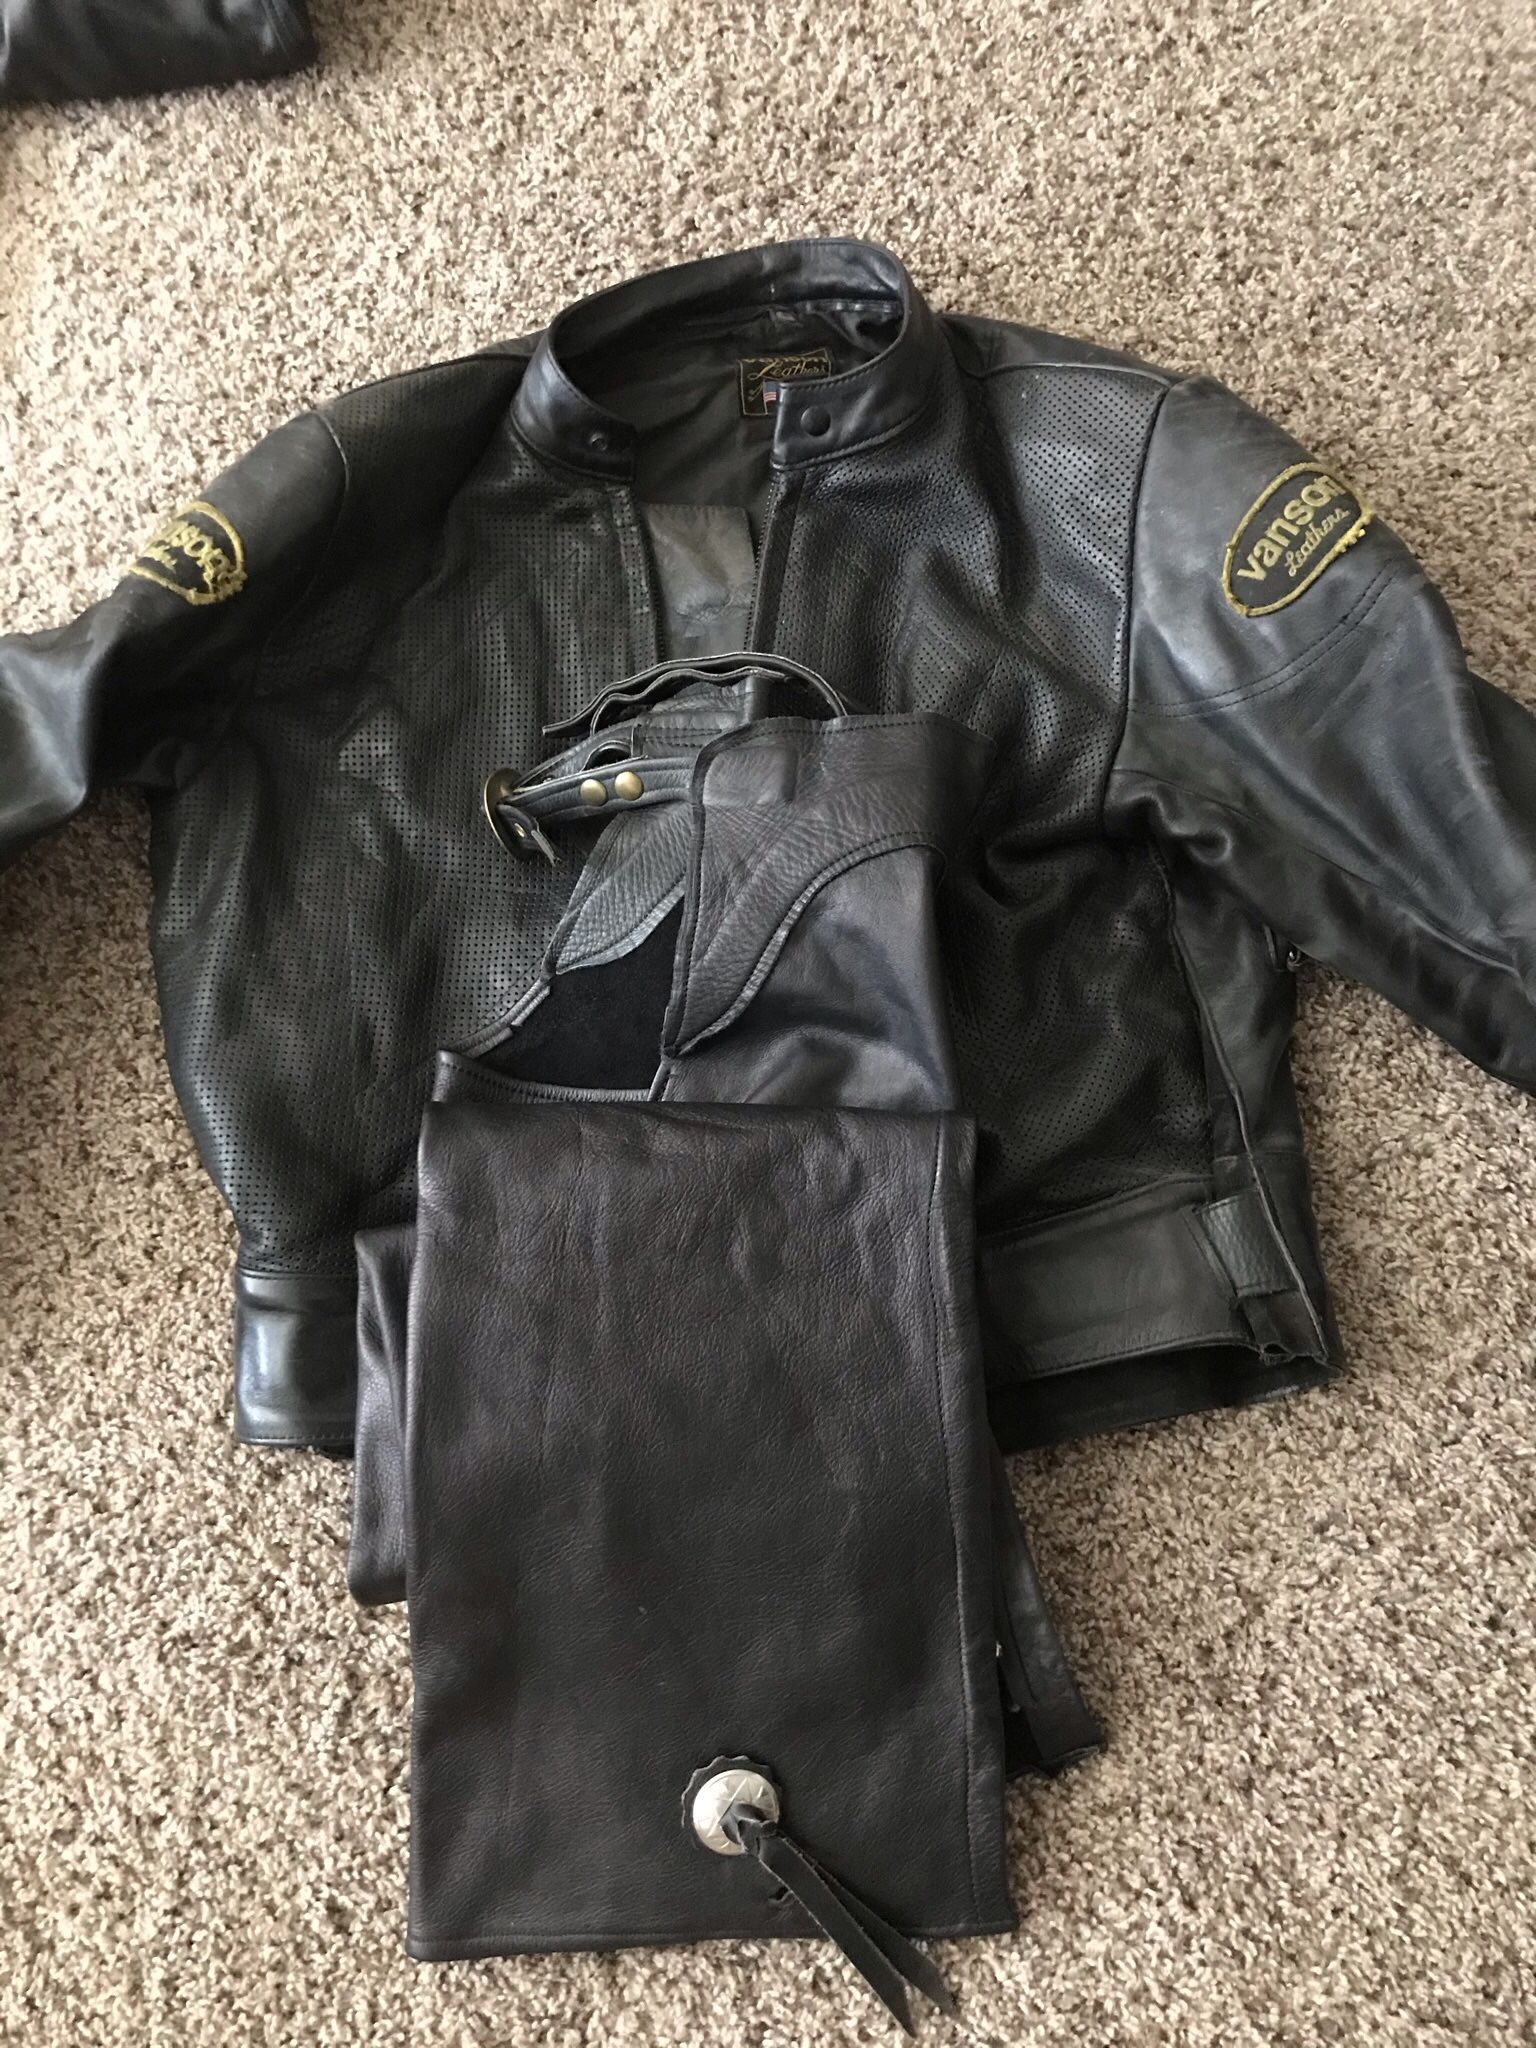 Leather Jackets And Chaps Make Offer!! Leather Chaps